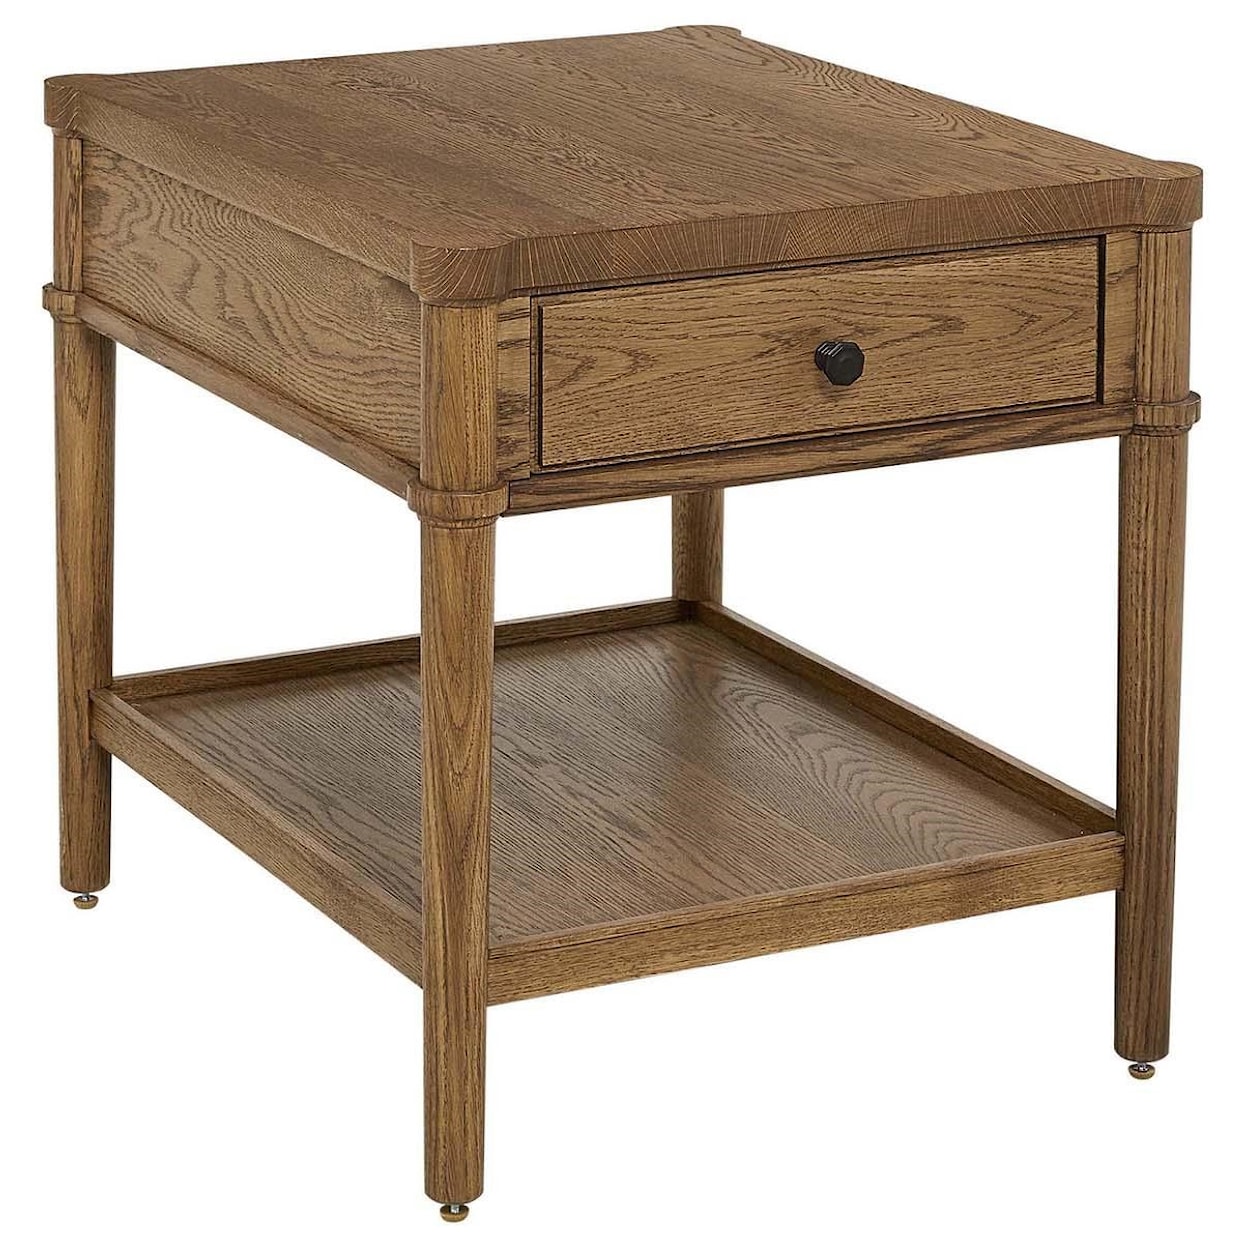 Stickley St. Lawrence St. Lawrence Post End Table